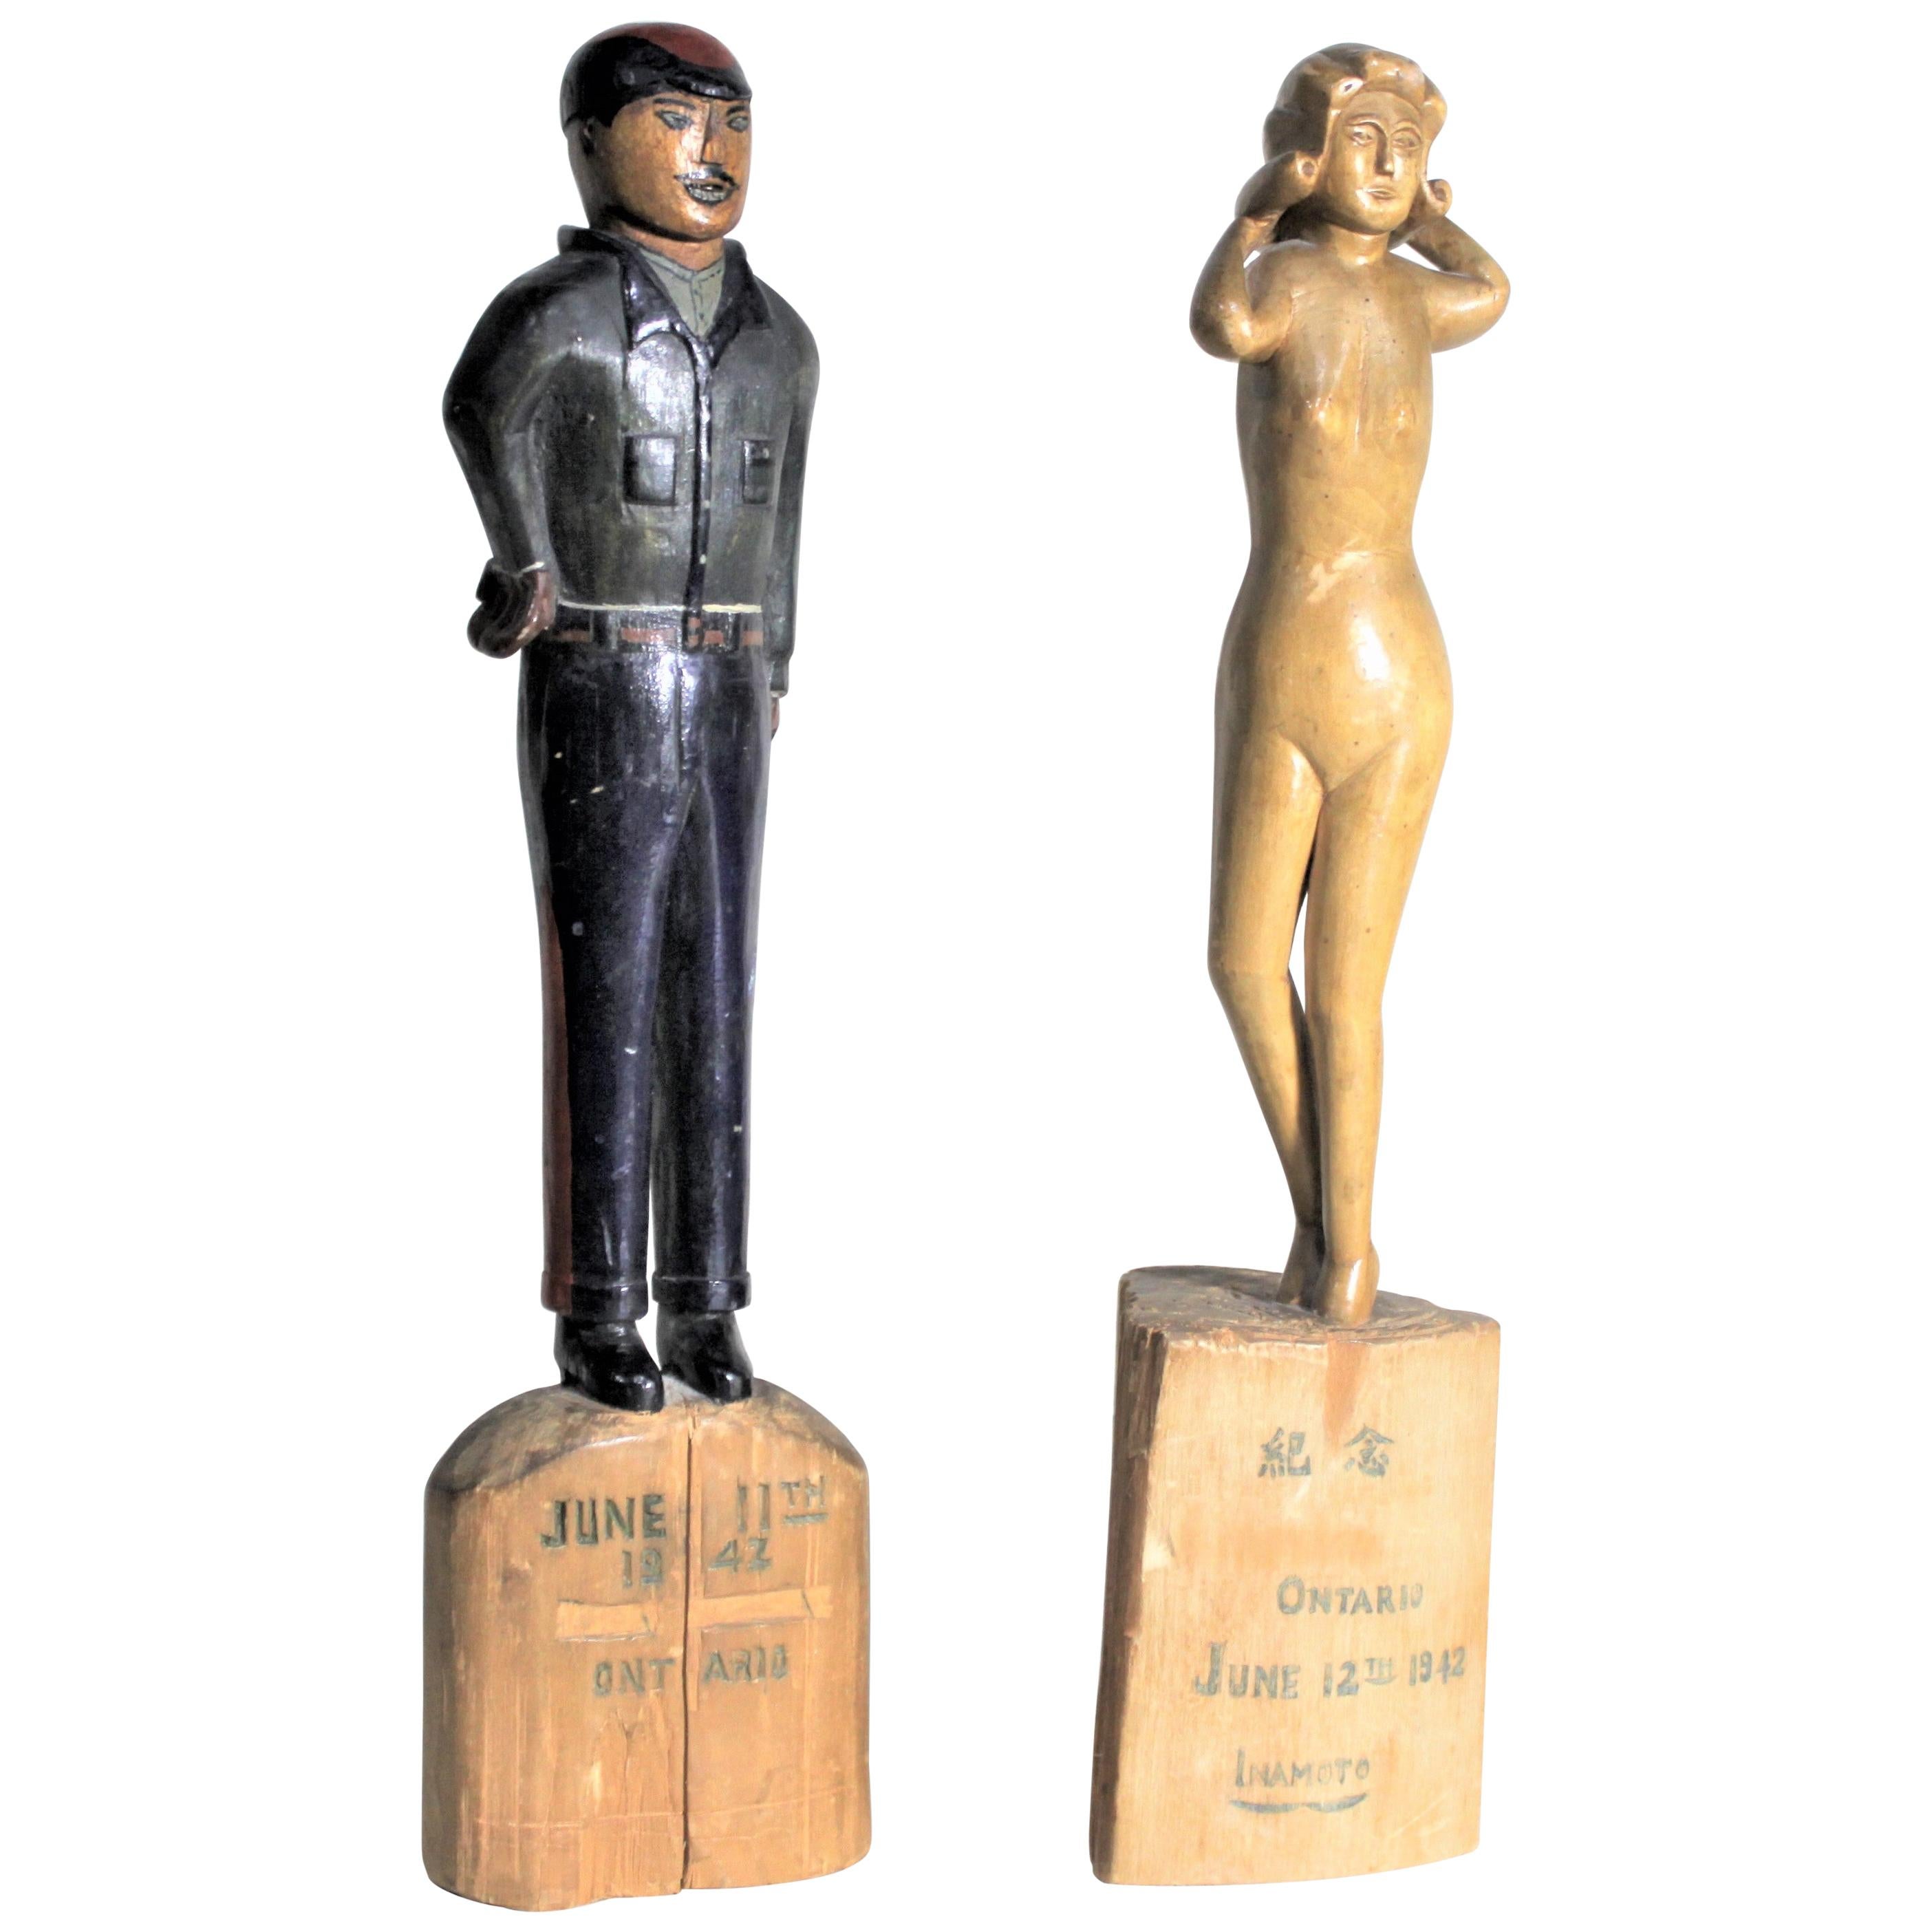 Pair of Canadian Folk Art Carved Japanese Internment Camp Figures or Sculptures